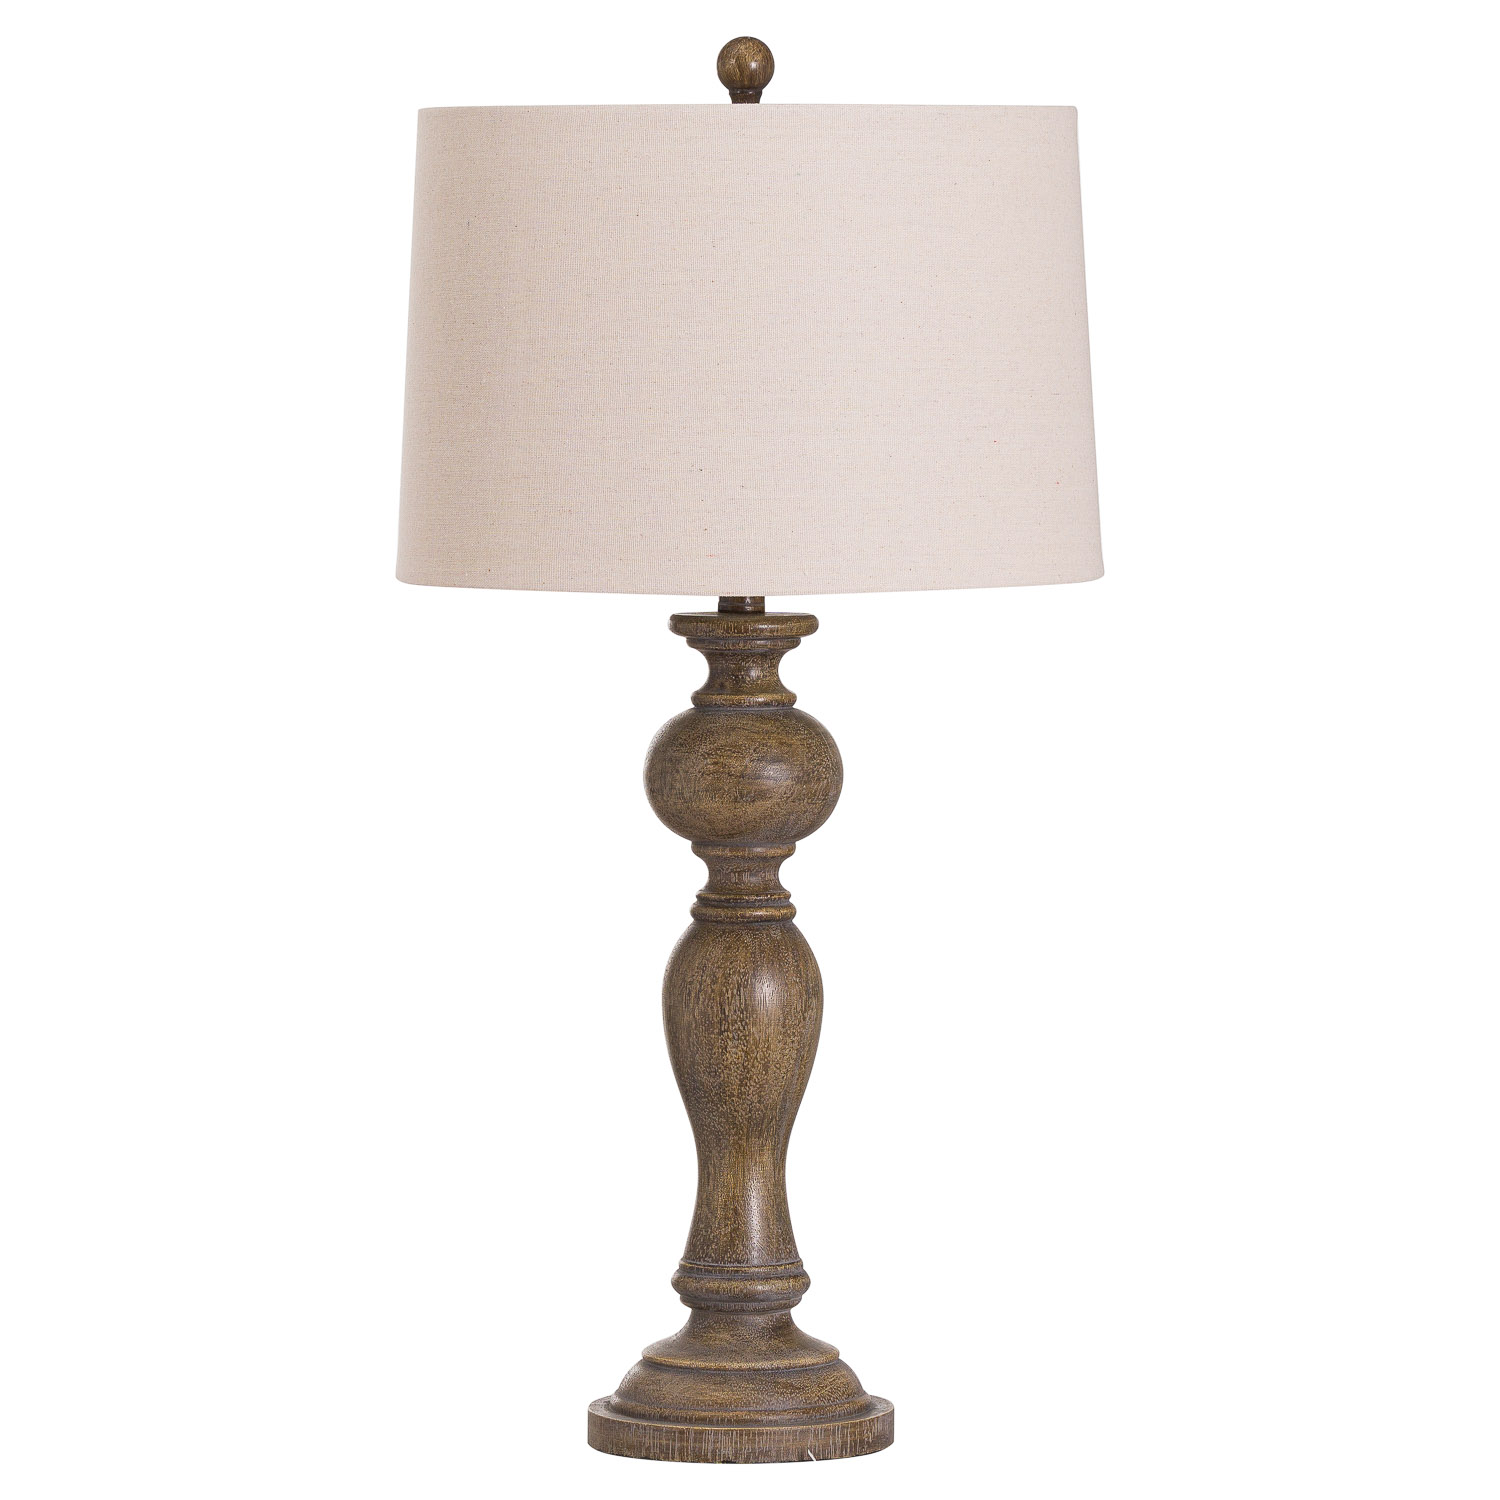 Luca Table Lamp With Natural Shade - Image 1